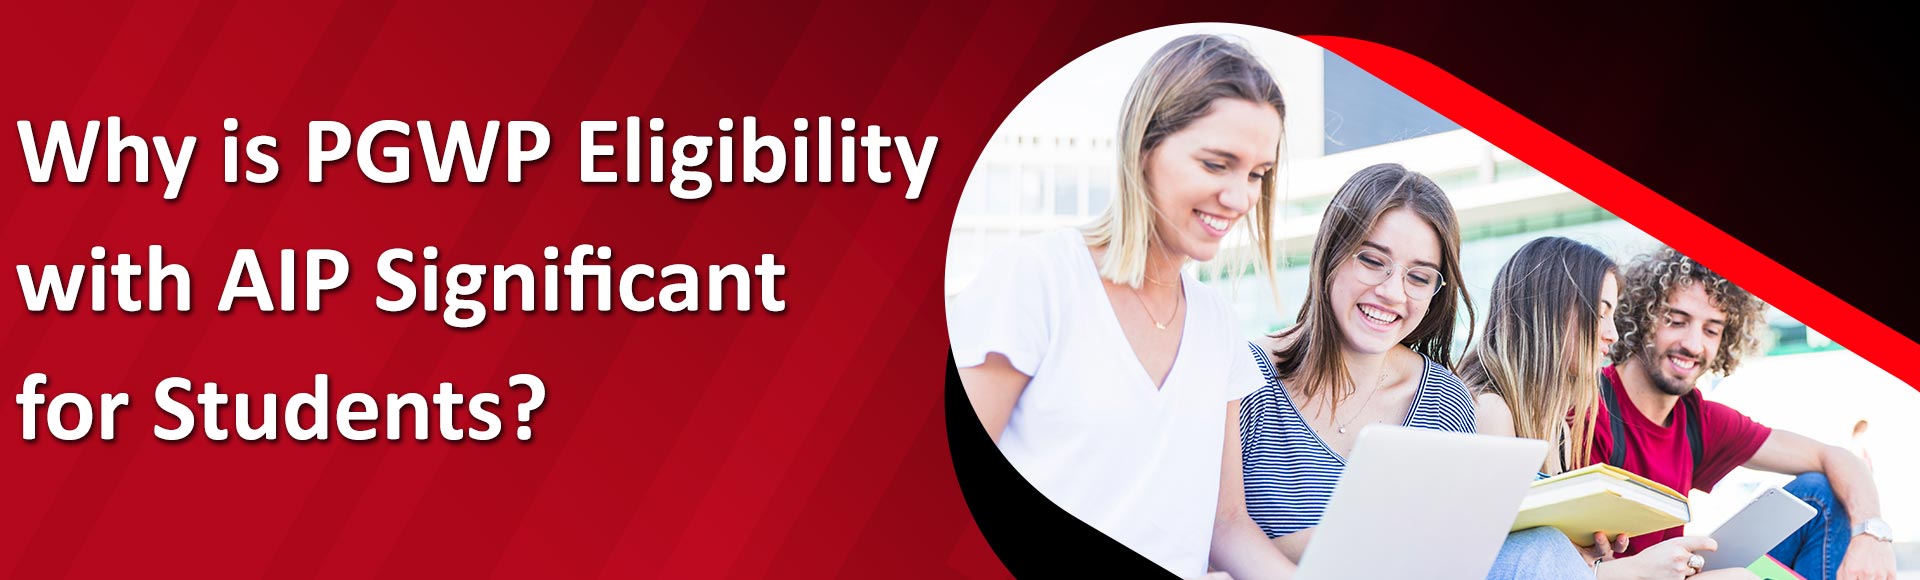 Why is PGWP eligibility with AIP significant for students?